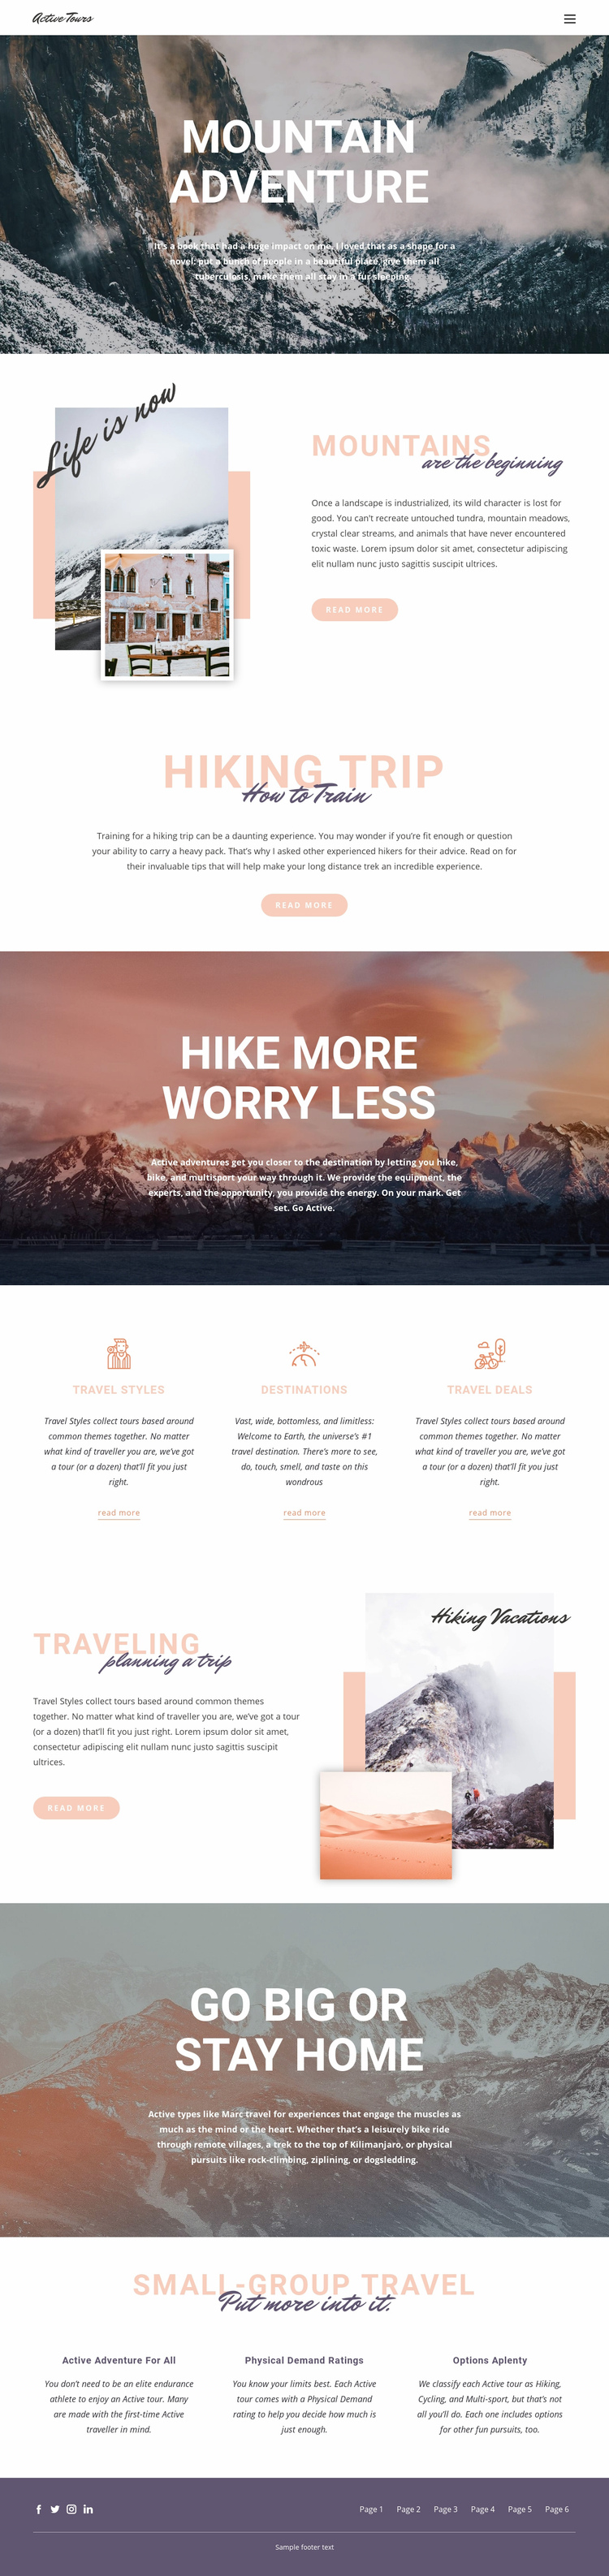 Guided backpacking trips Squarespace Template Alternative